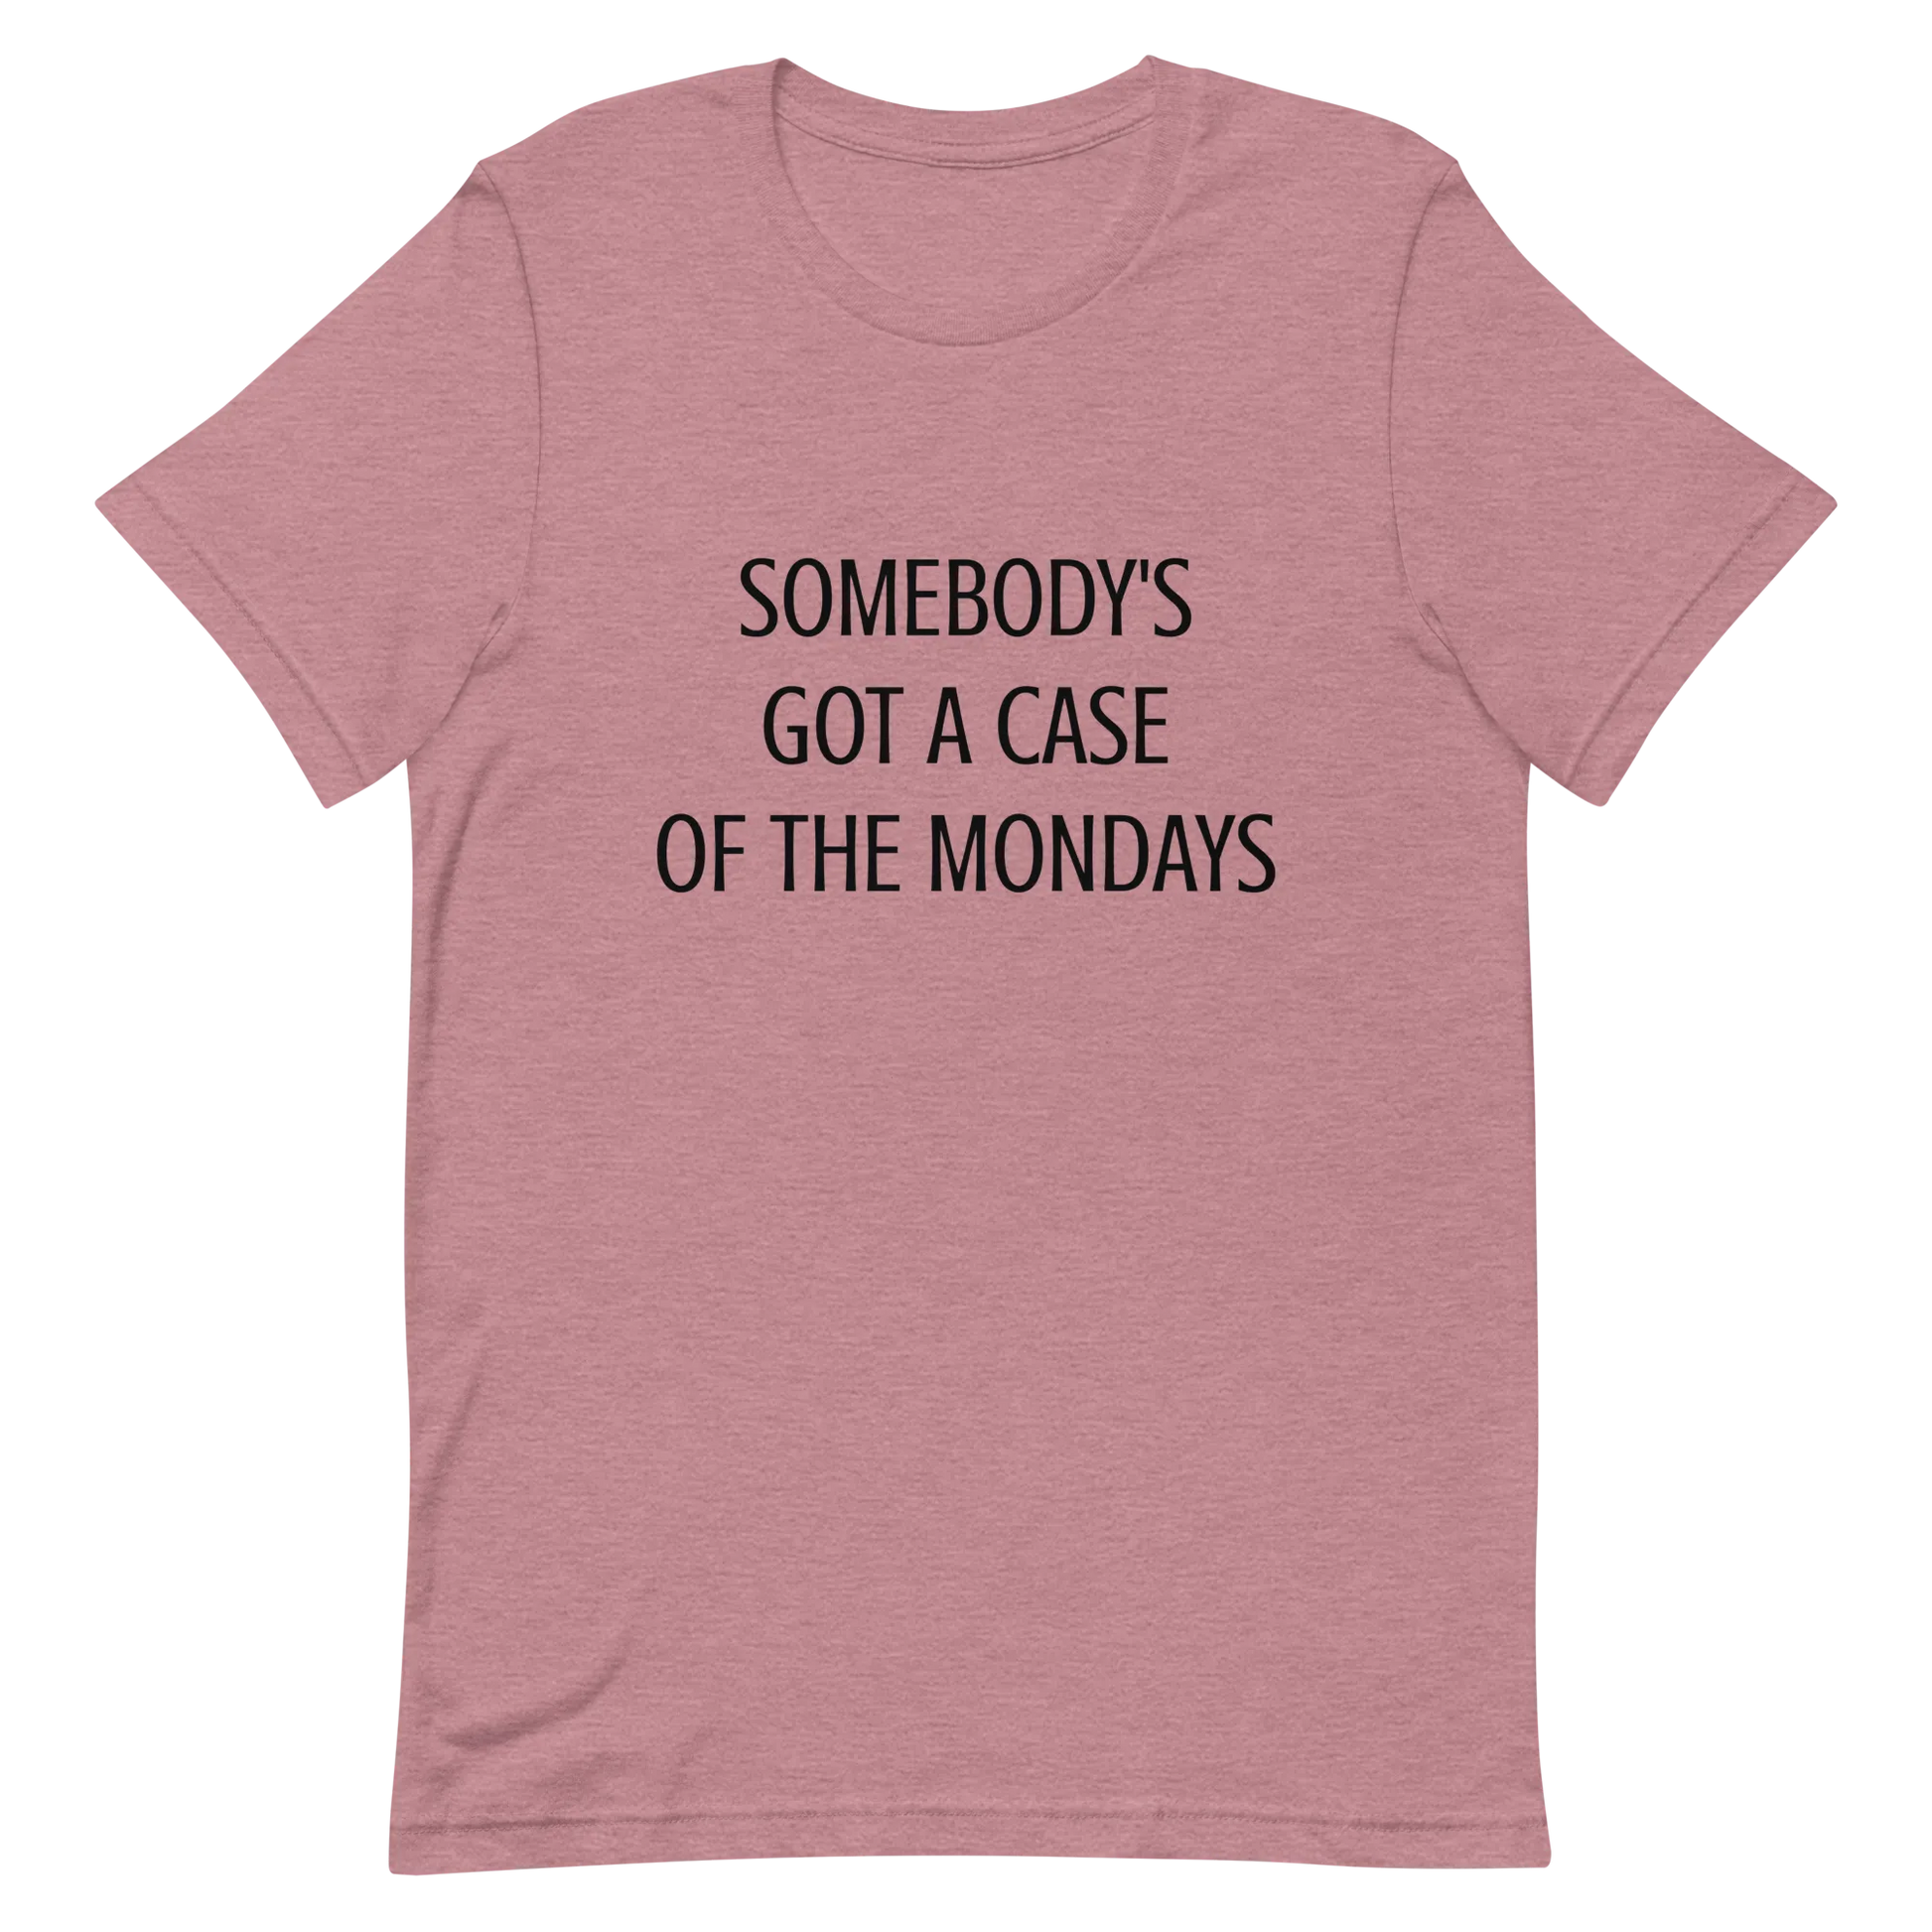 Somebody's Got a Case of the Mondays Tee in Heather Orchid flatlay